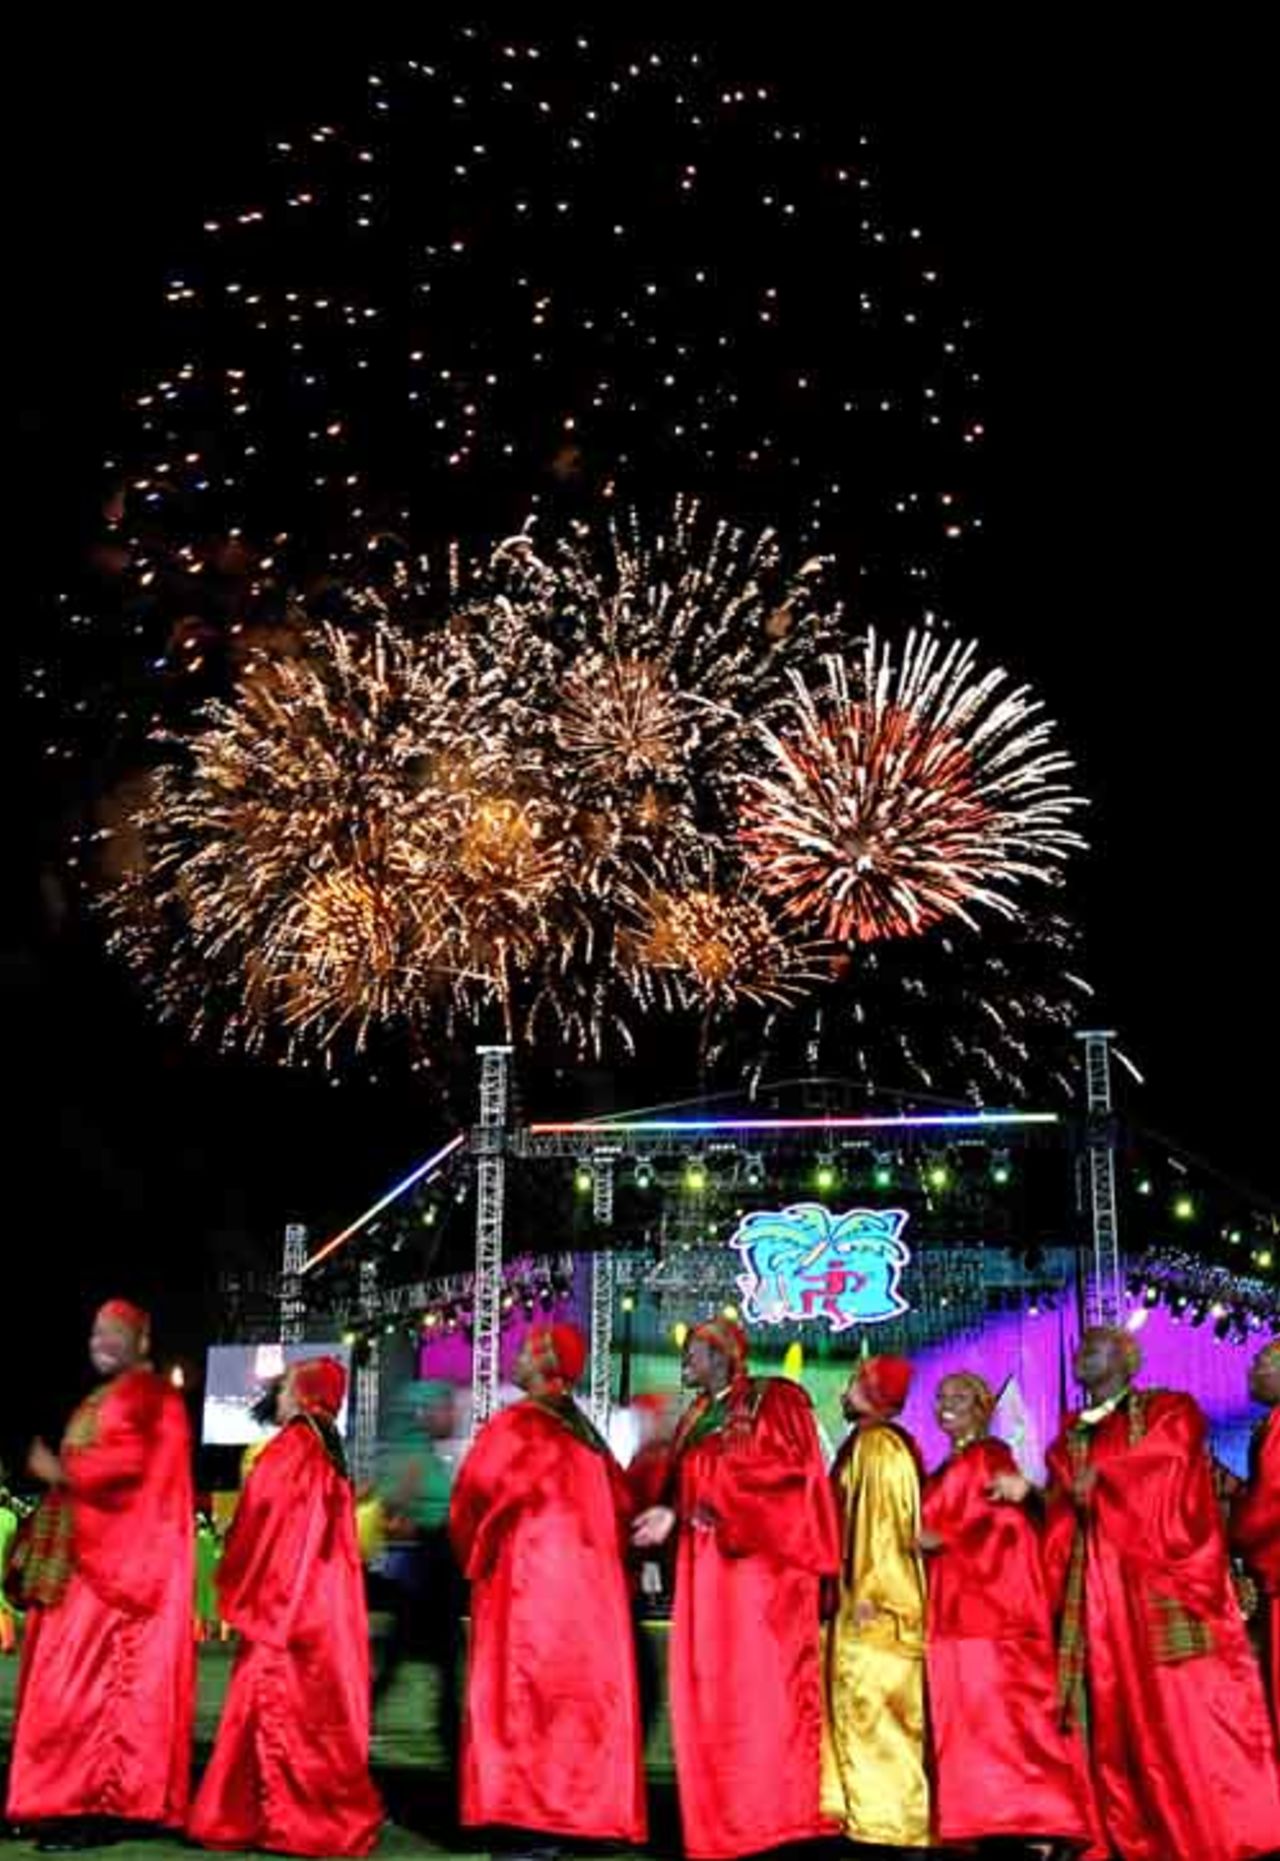 Dancers perform as fireworks illuminate the night sky during the opening ceremony of the 2007 World Cup Cricket,Trelawny, March 11, 2007